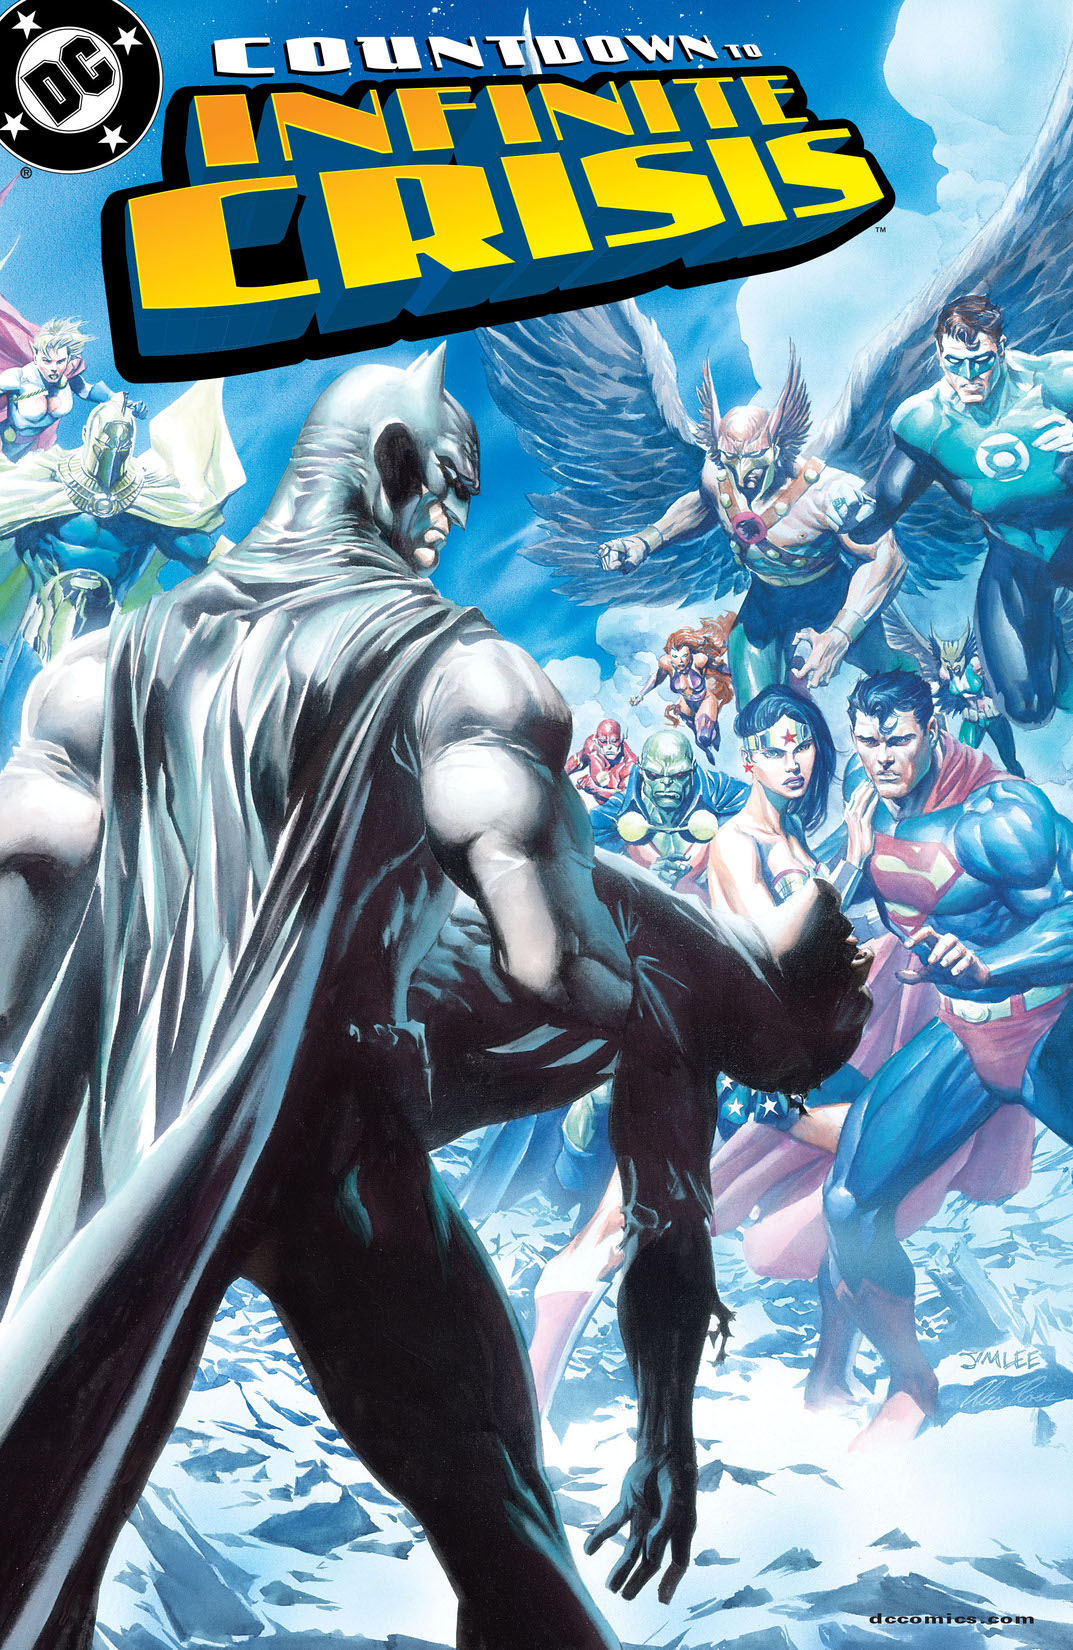 Countdown to Infinite Crisis #1 preview images